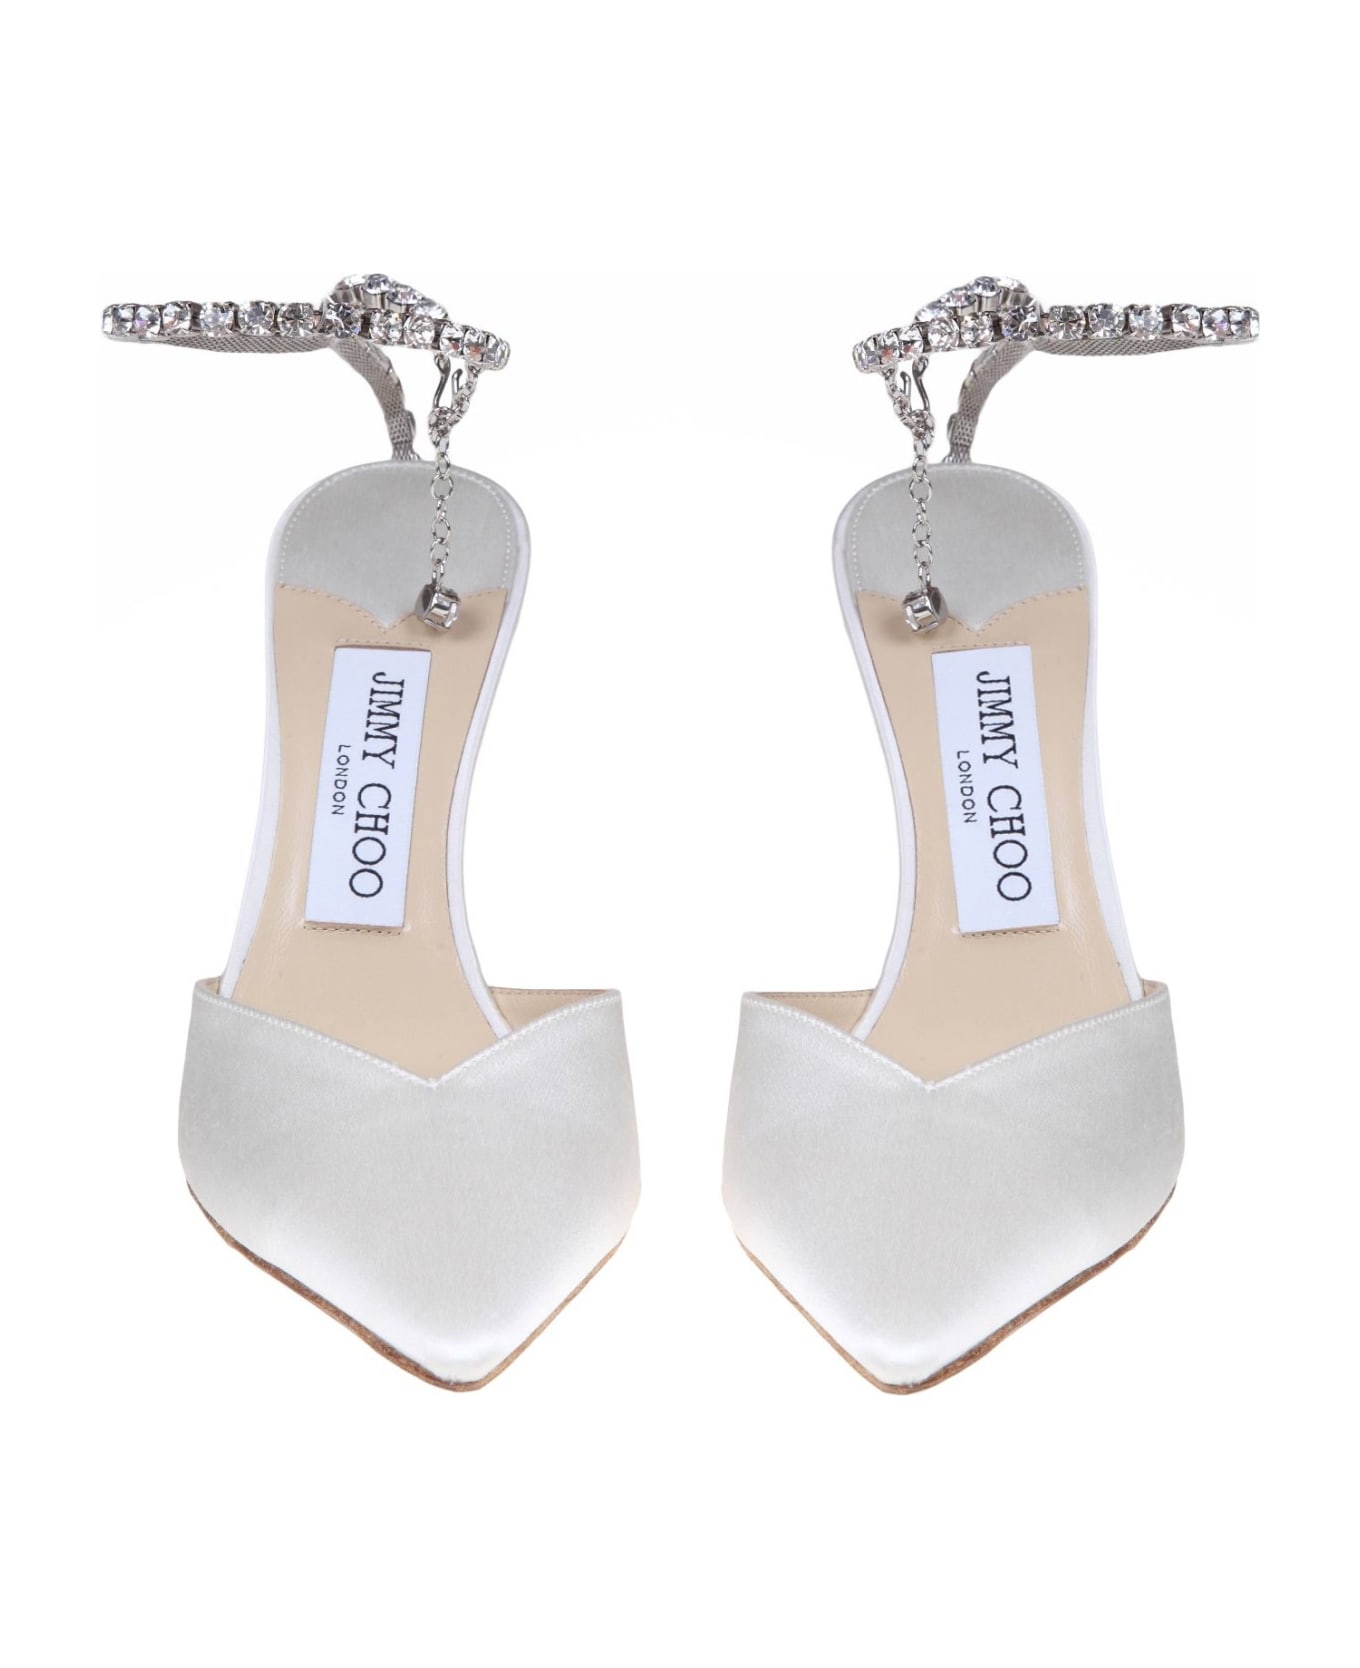 Jimmy Choo Slingback Saeda 100 In Satin With Applied Crystals - Ivory/Crystal